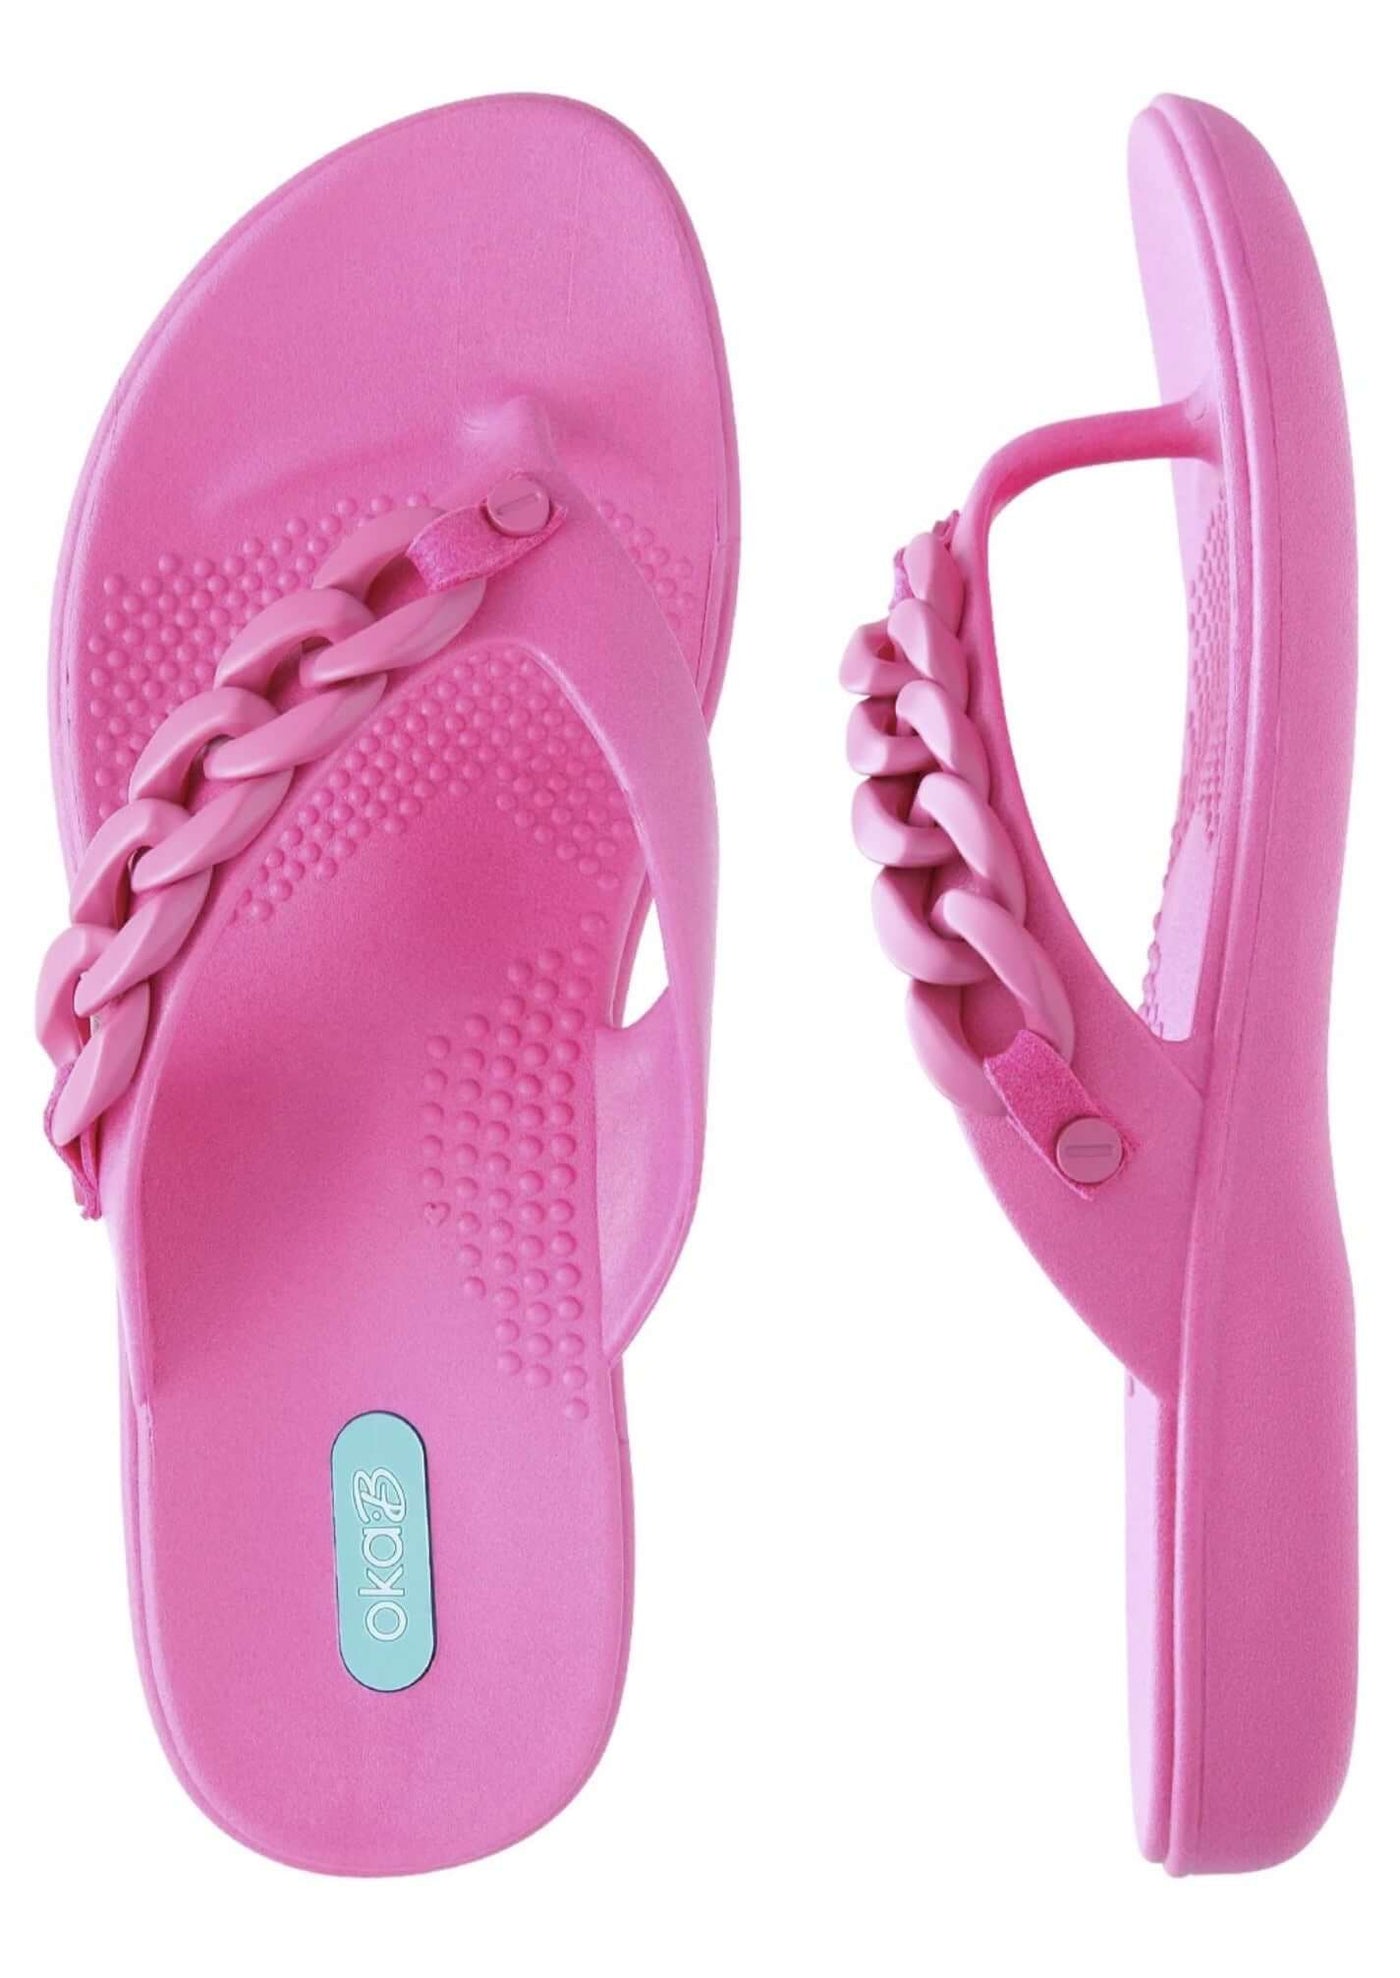 Made in USA | Oka-B Oliver Ginger Sangria Pink Flip Flop Sandal with Chain Accent Proudly Made in the USA! | Classy Cozy Cool Boutique